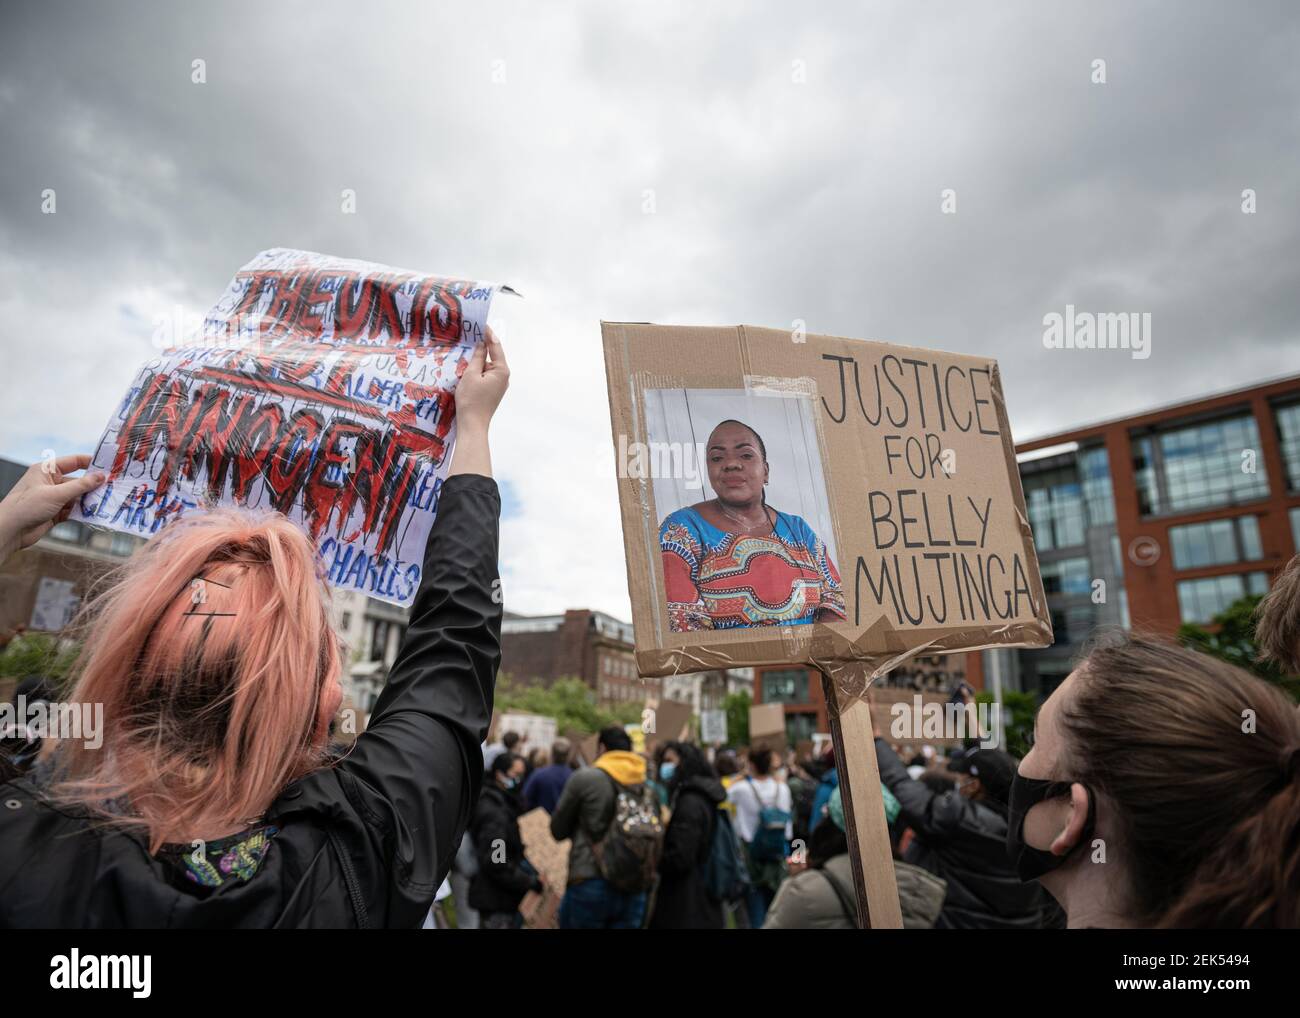 A protester holds a placard demanding justice for Belly Mujinga during the demonstration. Thousands of people attend the most recent 'Black Lives Matter' protest in Manchester's city centre following the death of George Floyd in the USA. (Photo by Kenny Brown / SOPA Images/Sipa USA)  Stock Photo